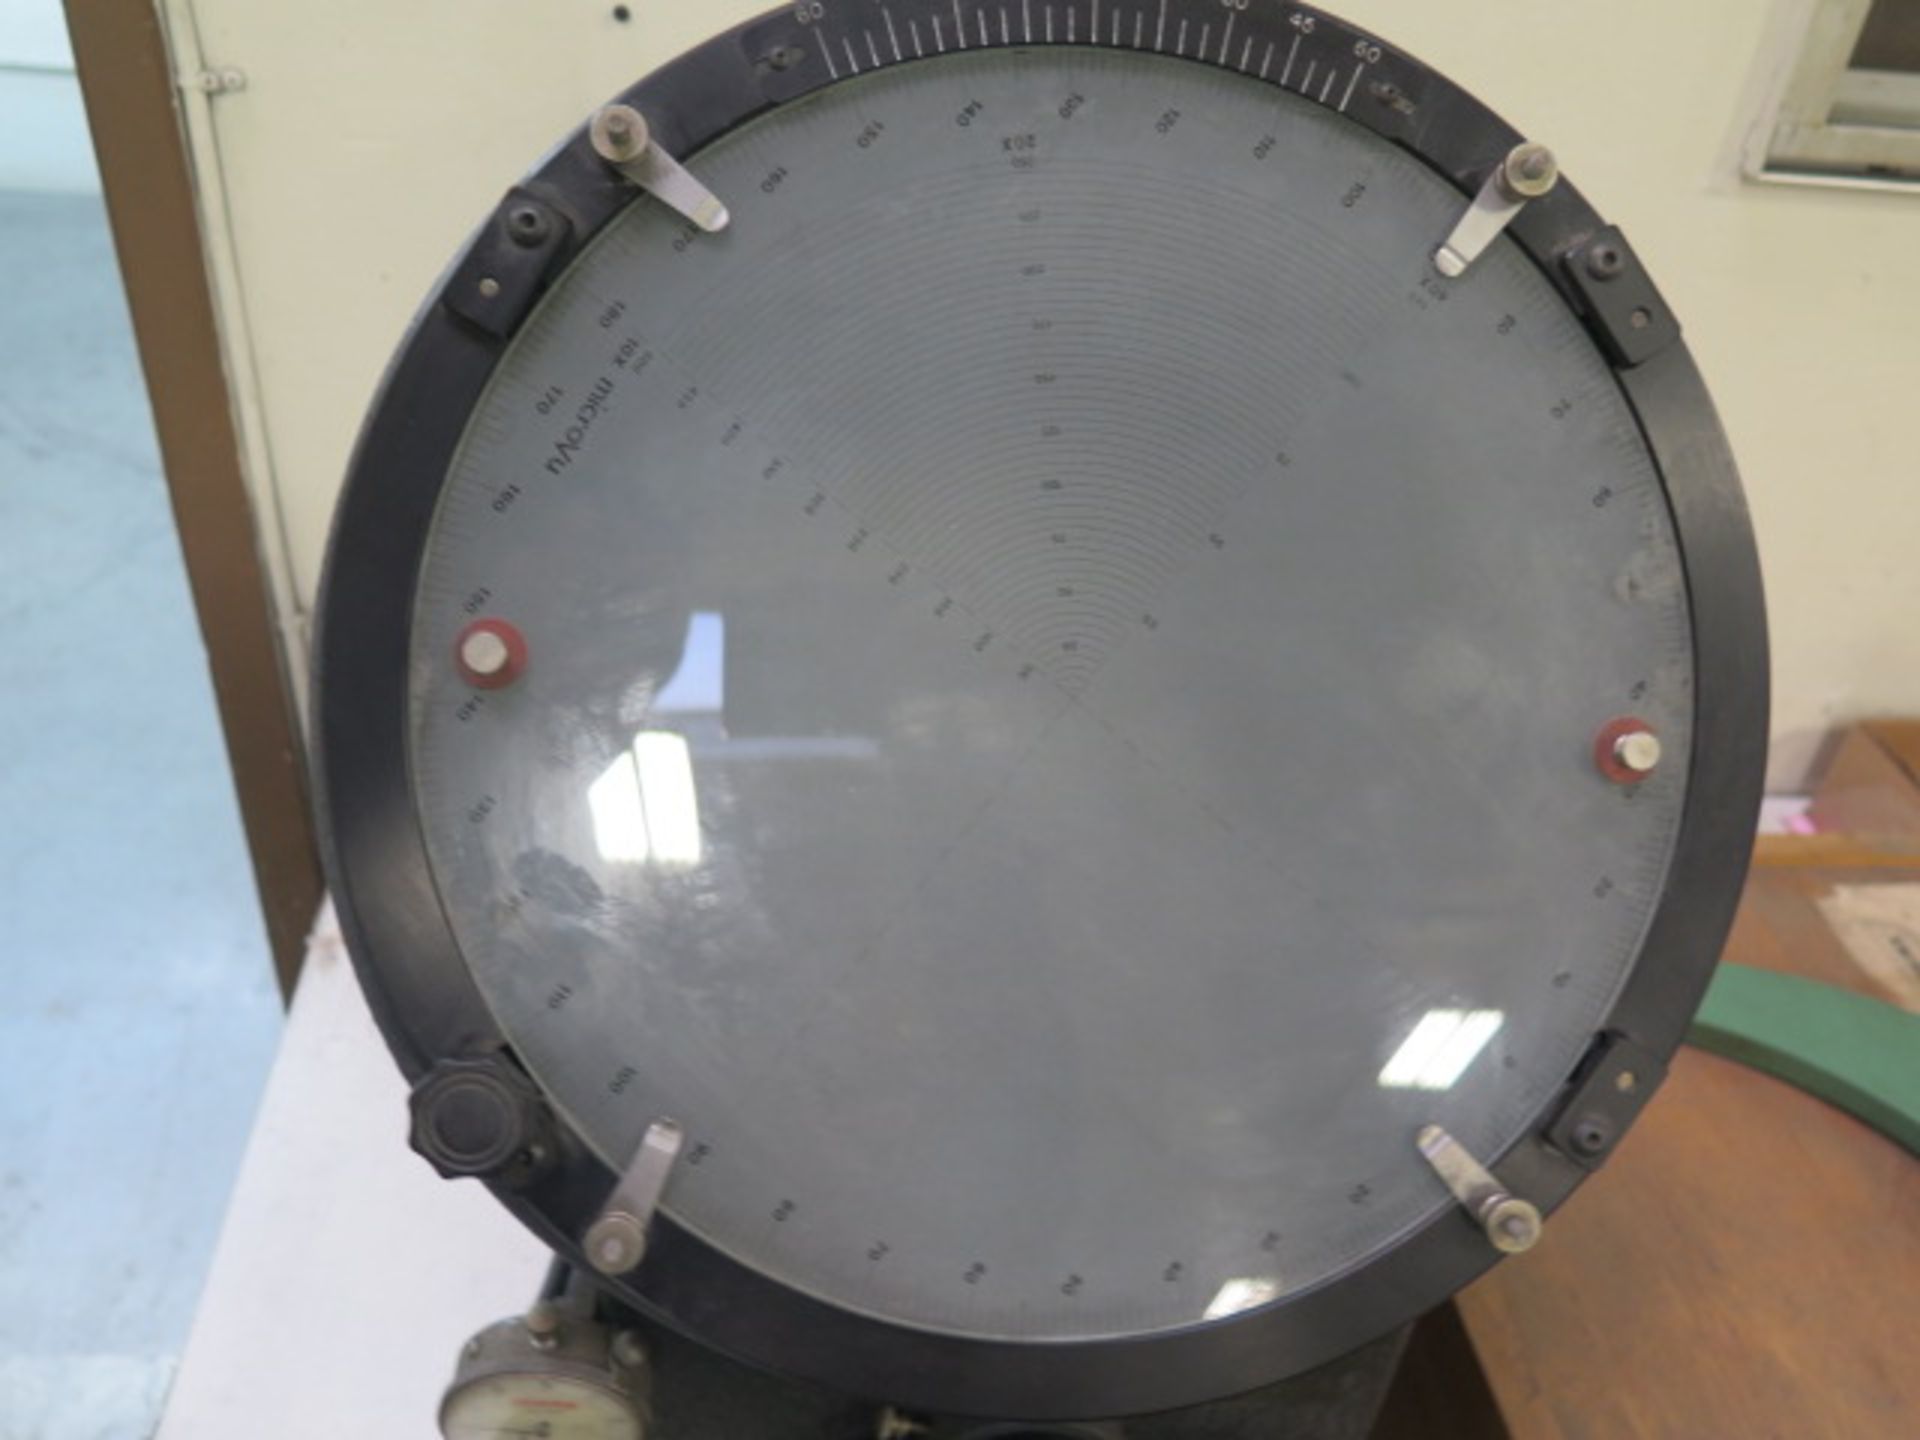 MicroVu 12” Bench Model Optical Comparator - Image 4 of 4